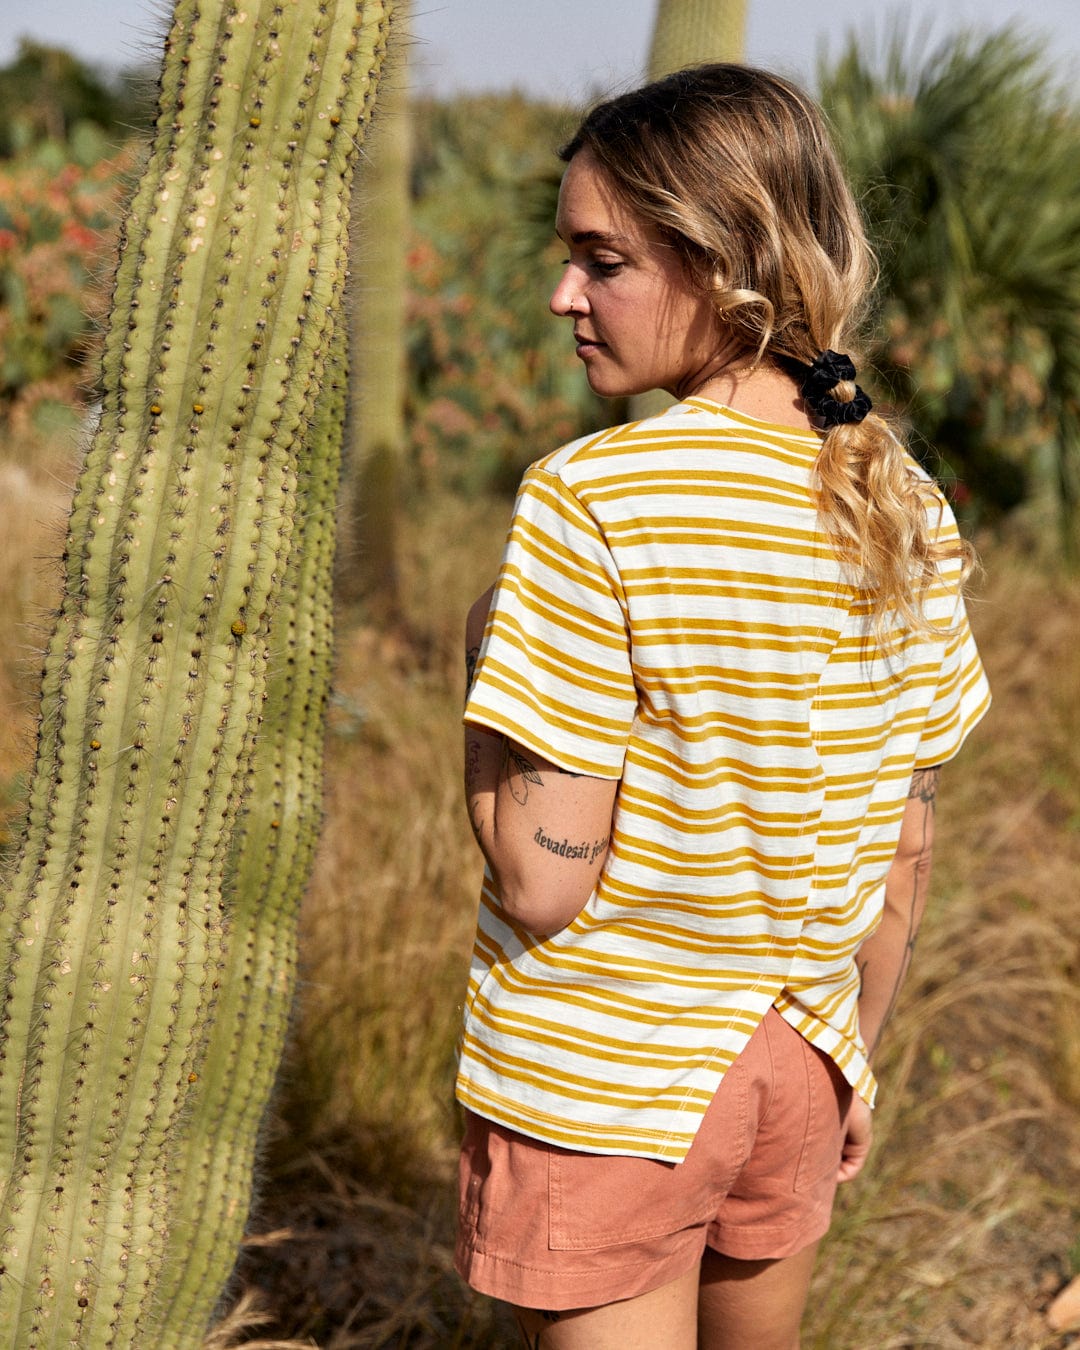 Woman in a Saltrock Sky - Women's Short Sleeve T-Shirt - Yellow standing next to a tall cactus in a sunny outdoor setting.